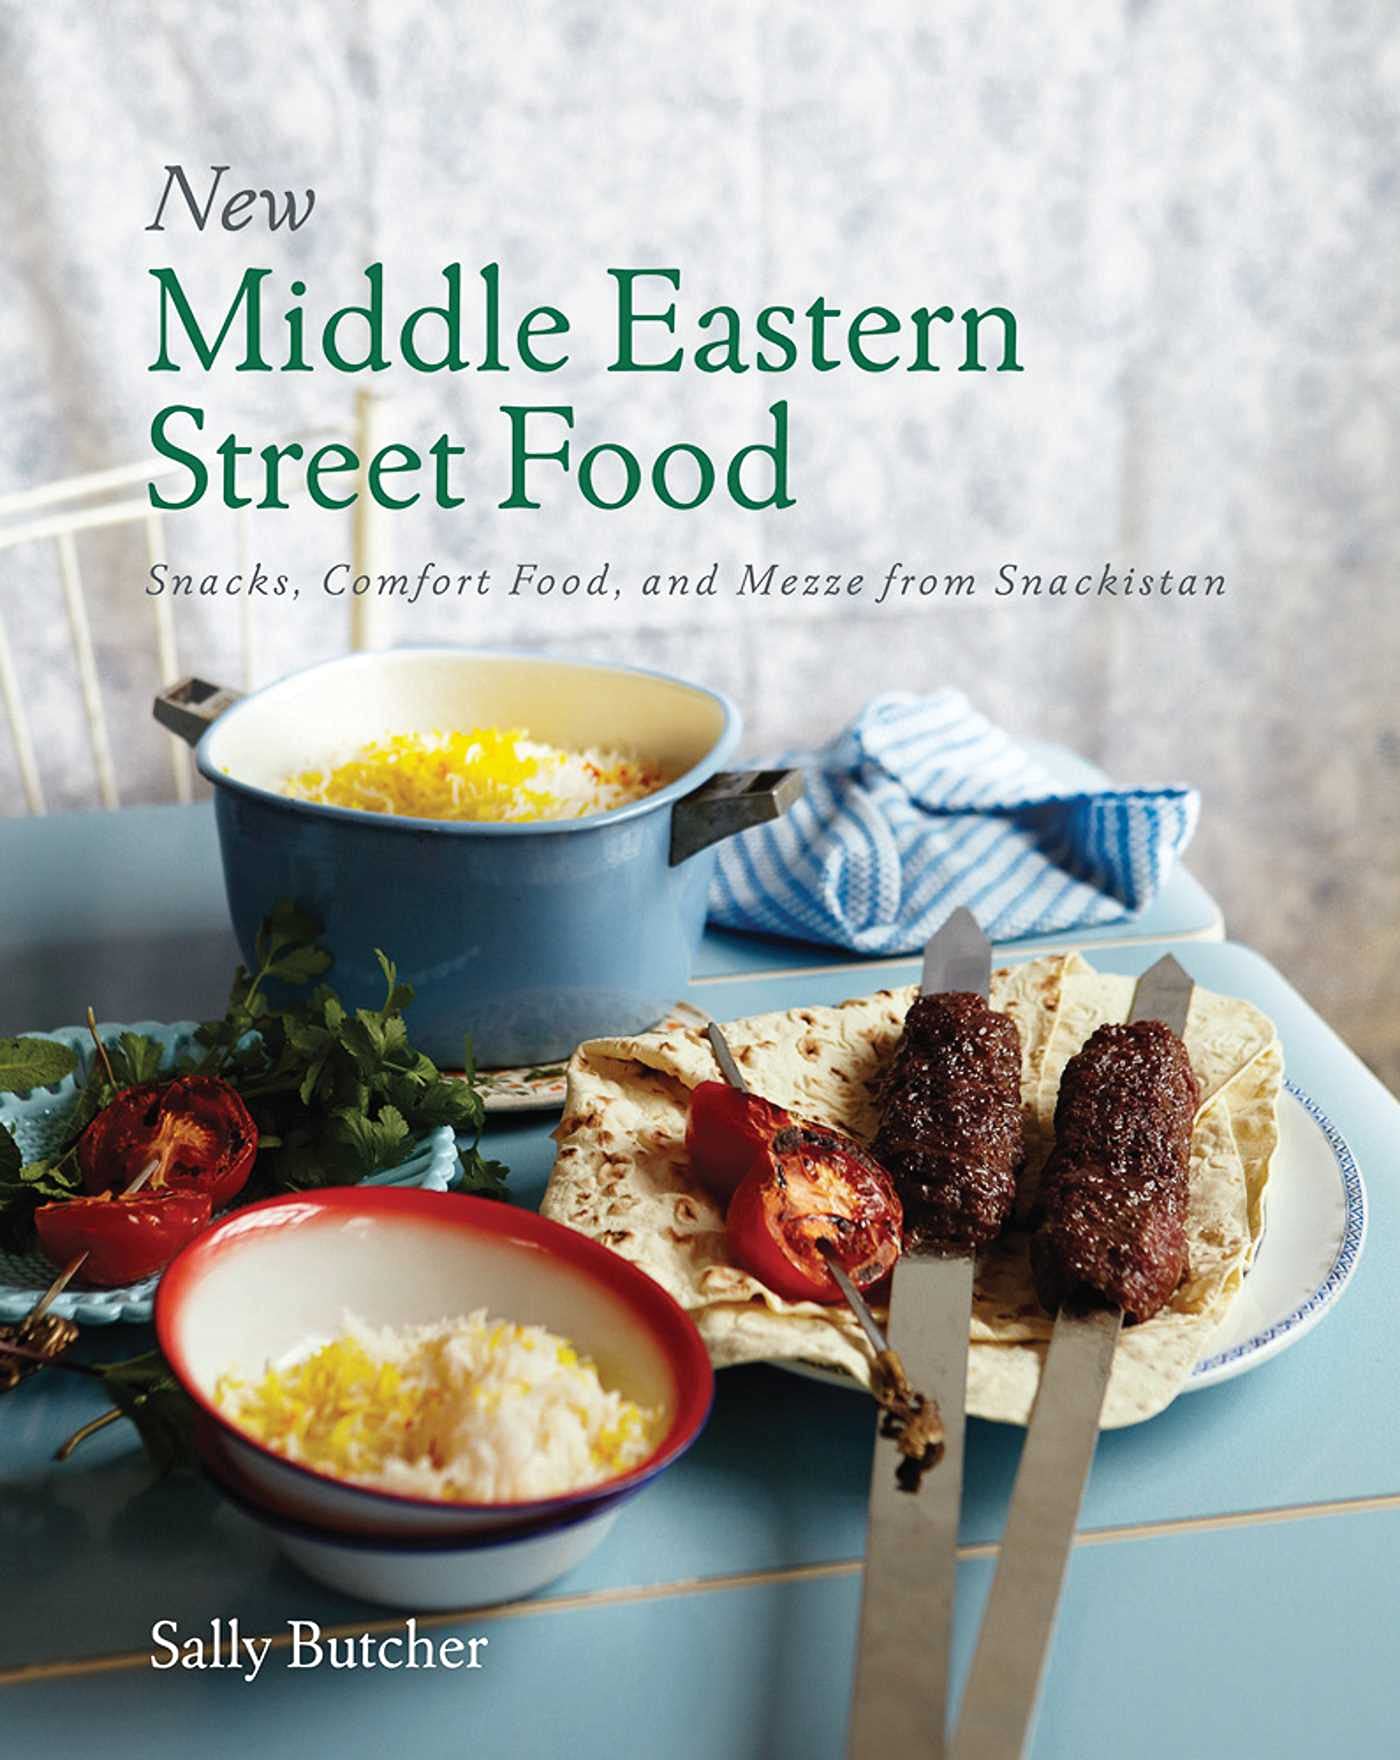 New Middle Eastern Street Food: Snacks, Comfort Food, and Mezze from Snackistan (Sally Butcher)